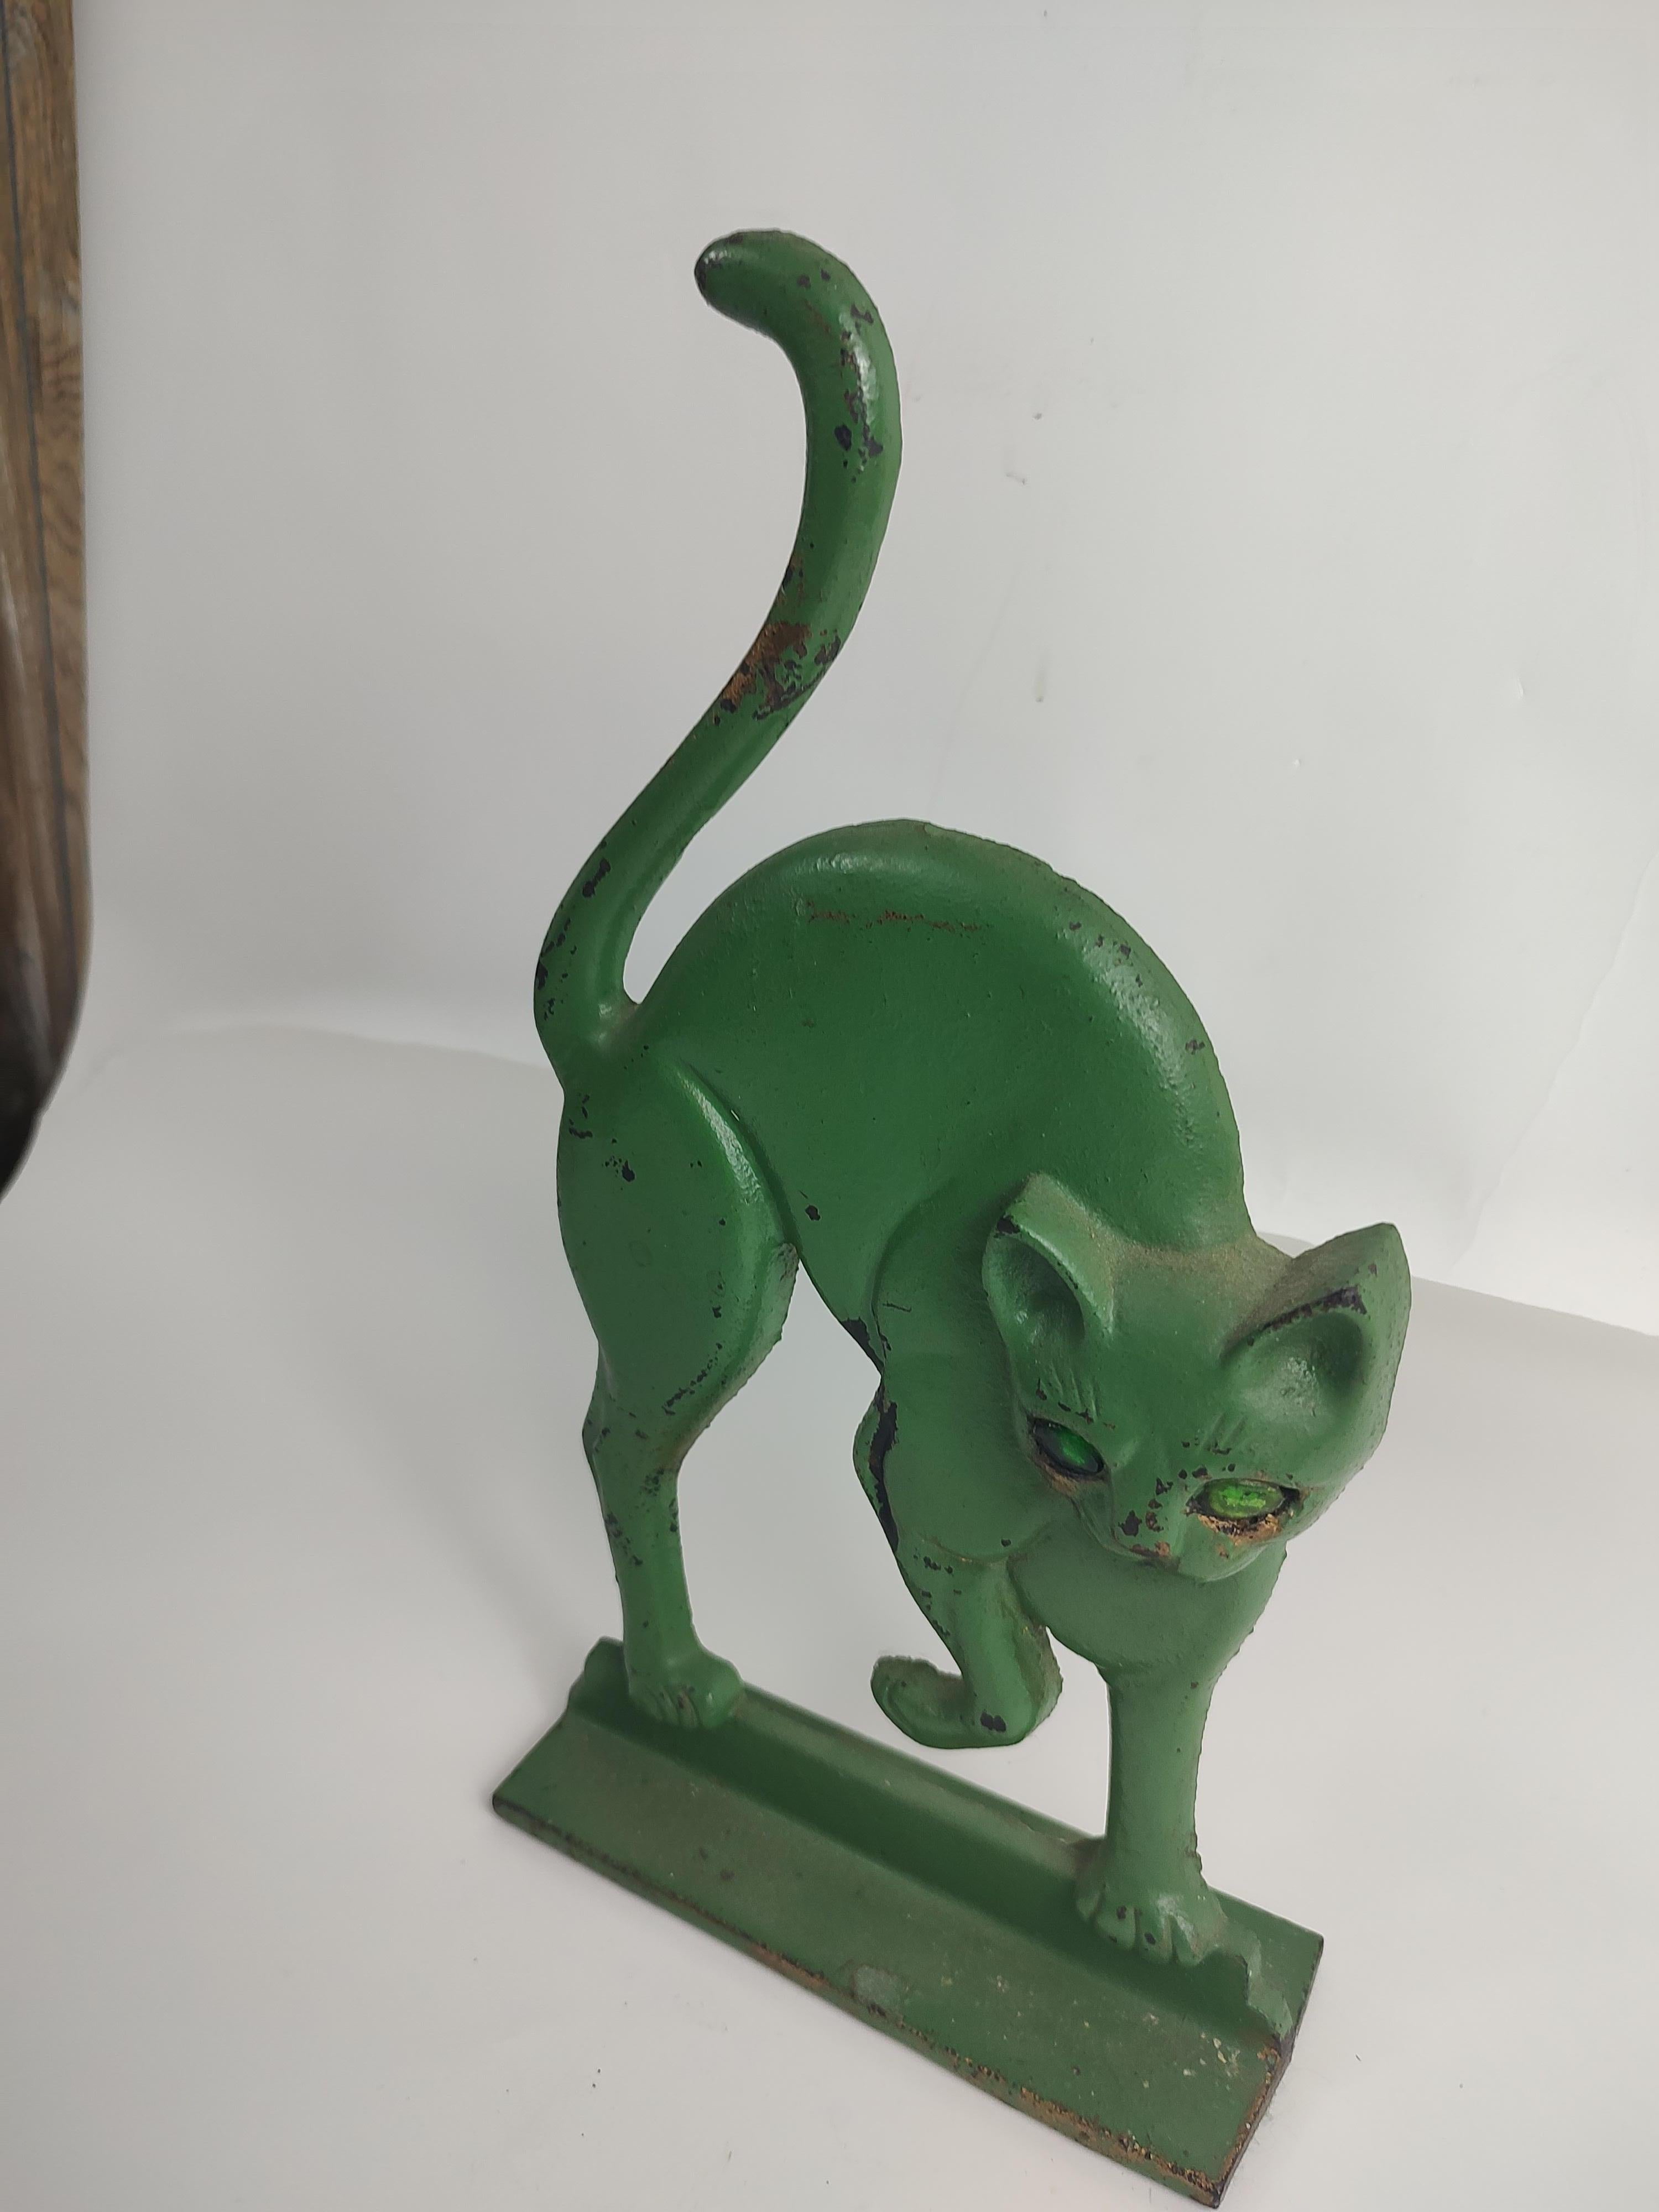 American Midcentury Arched Cat with Glass Eyes Doorstop in Old Green Paint